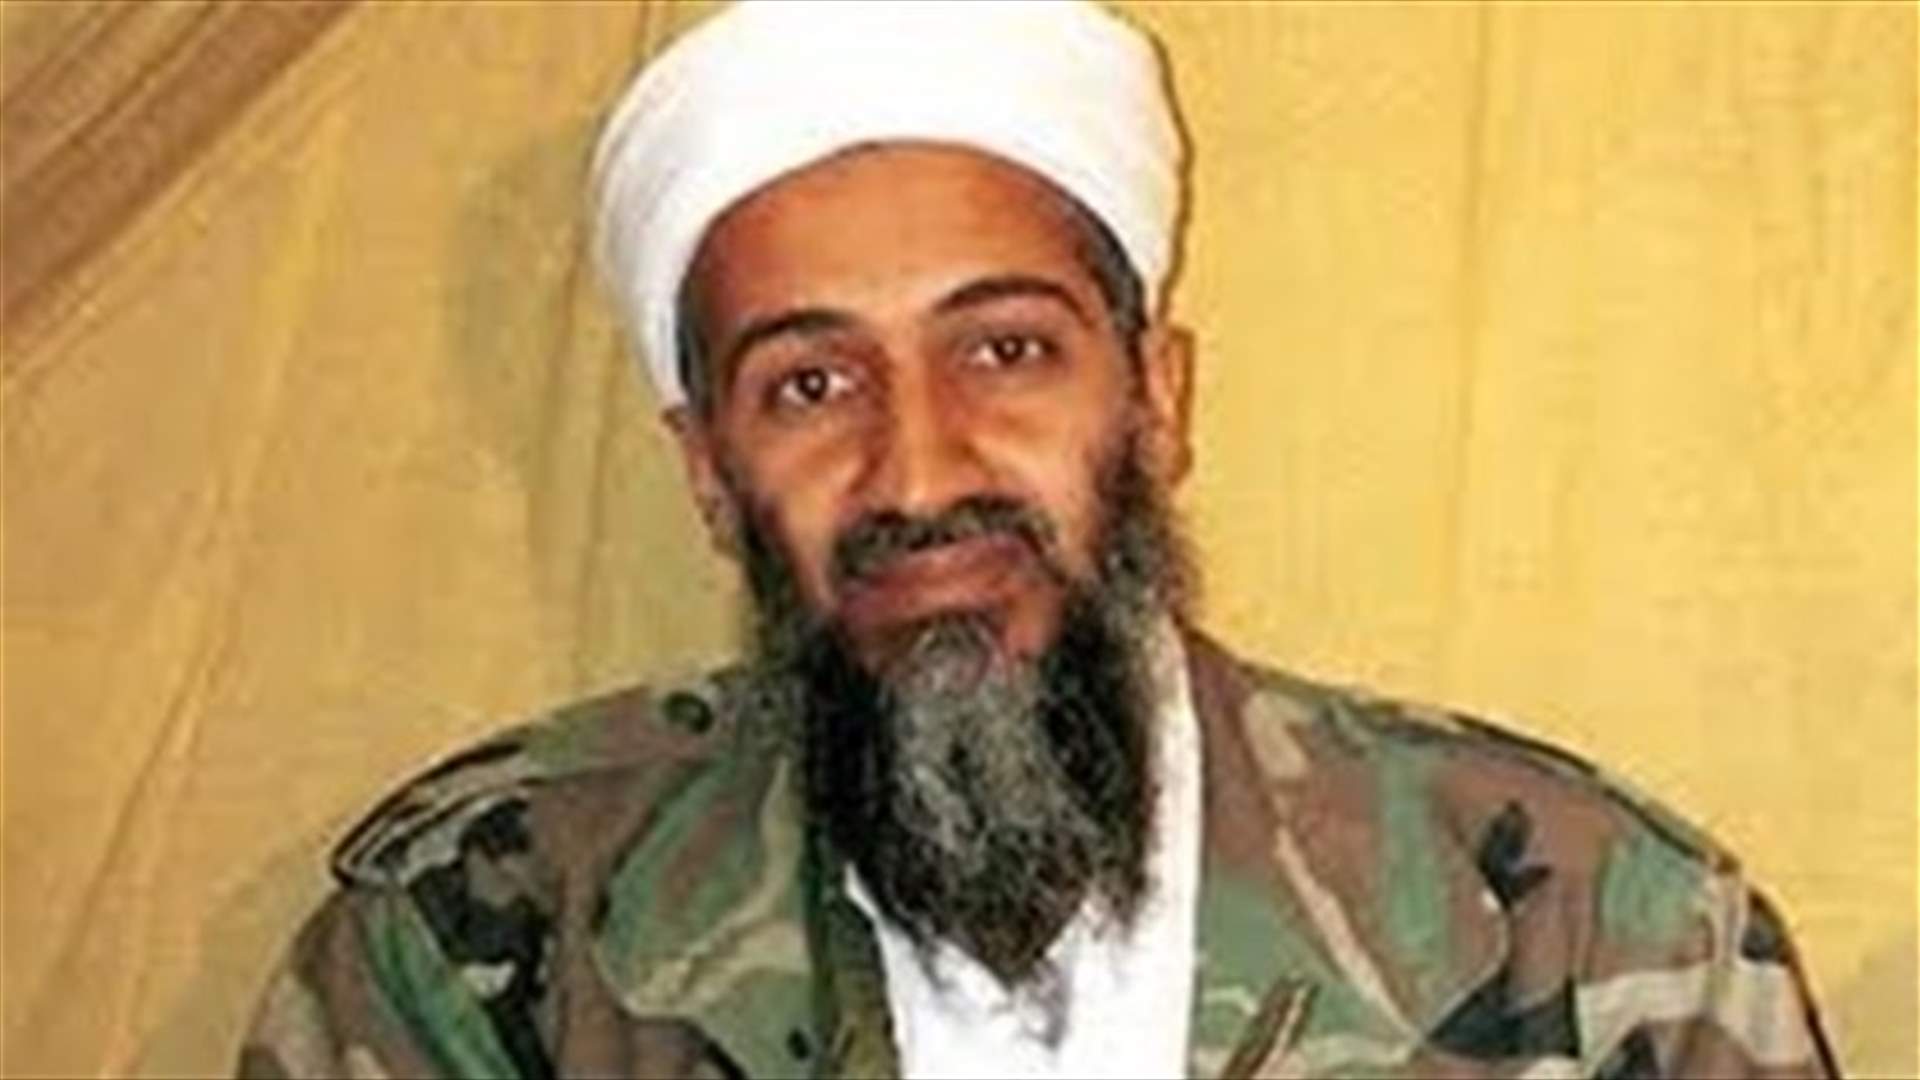 SEAL to pay $6.6 million to settle case over bin Laden book